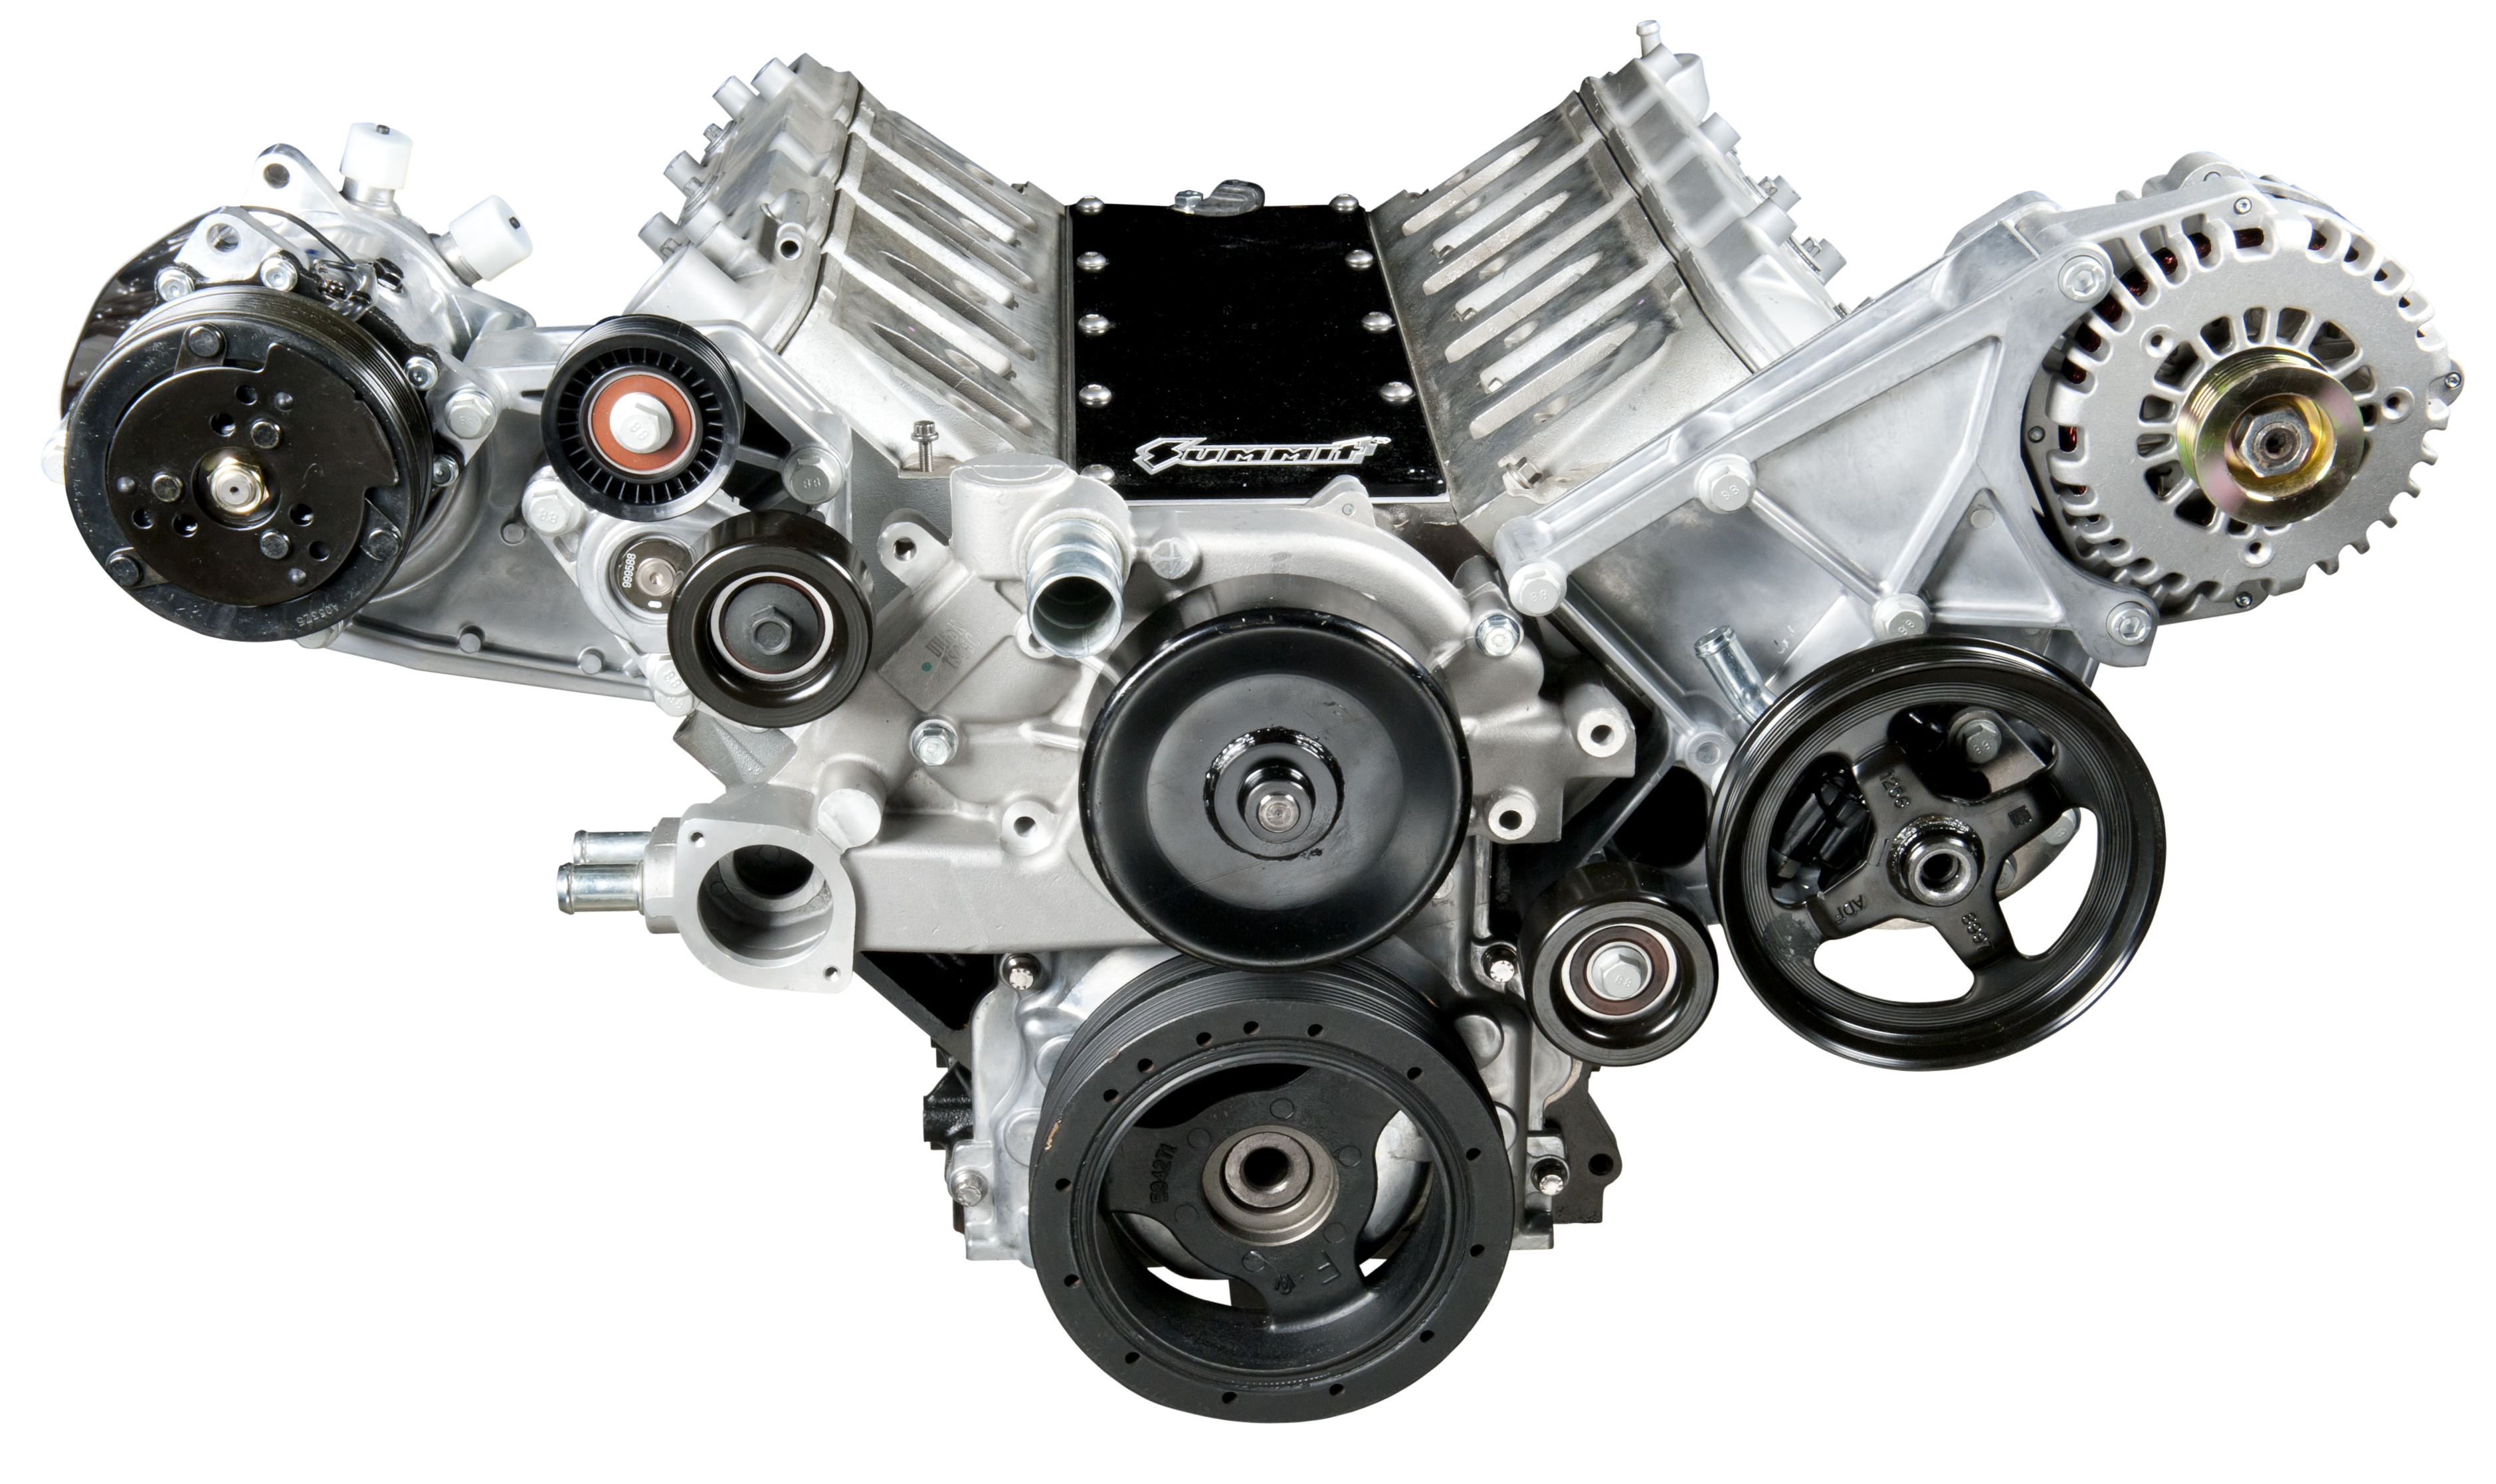 Summit Racing LS Front Drive Serpentine Kit with A/C, Power Steering Pump, and Alternator